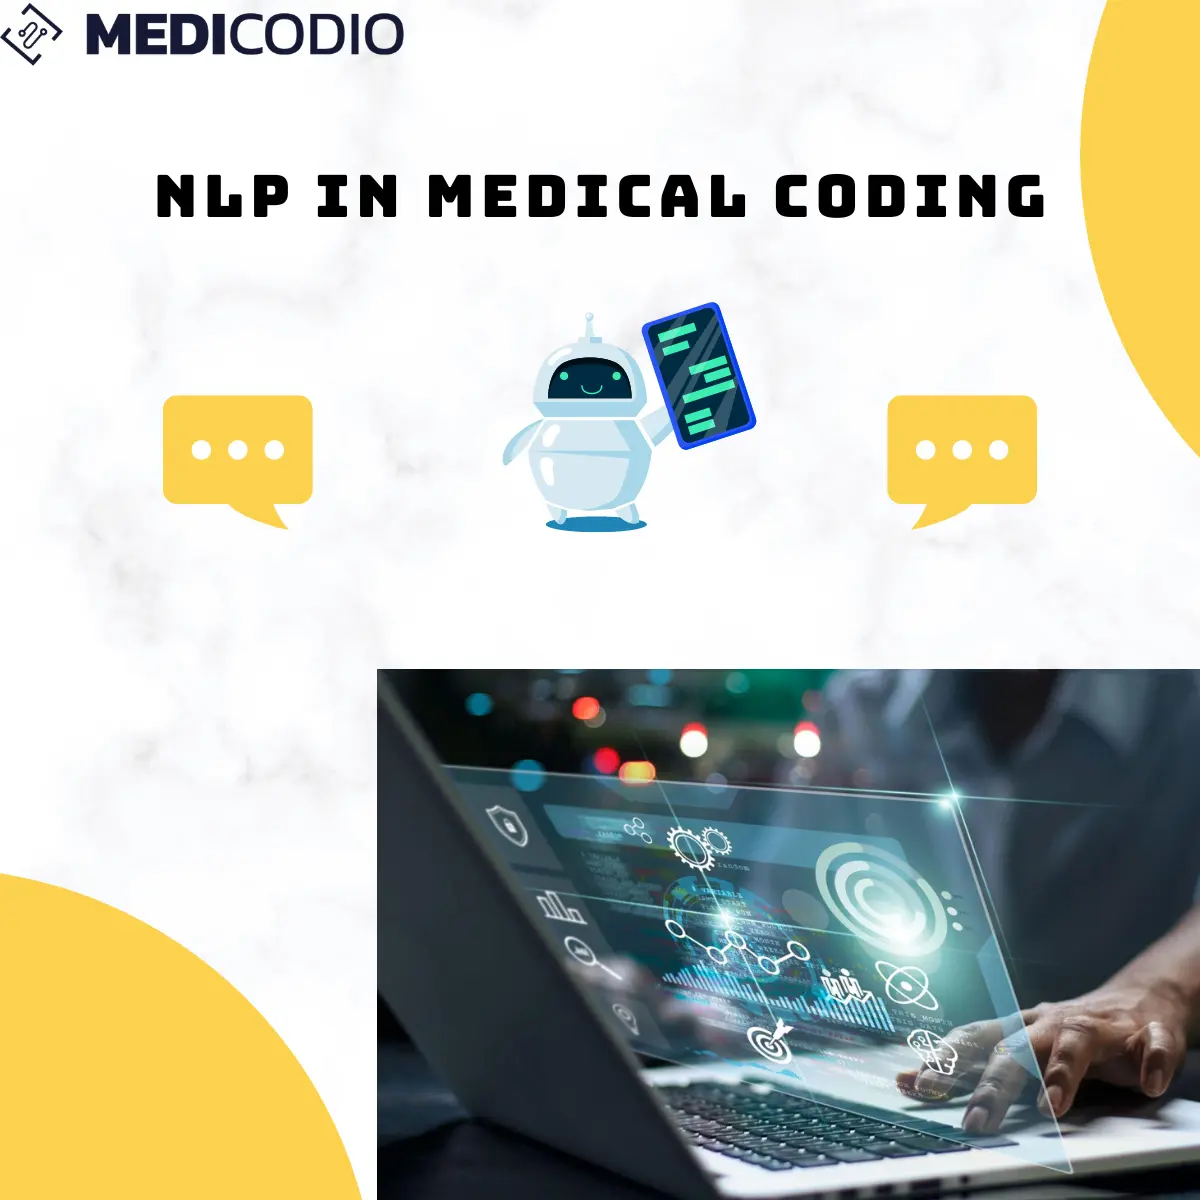 NLP in medical coding